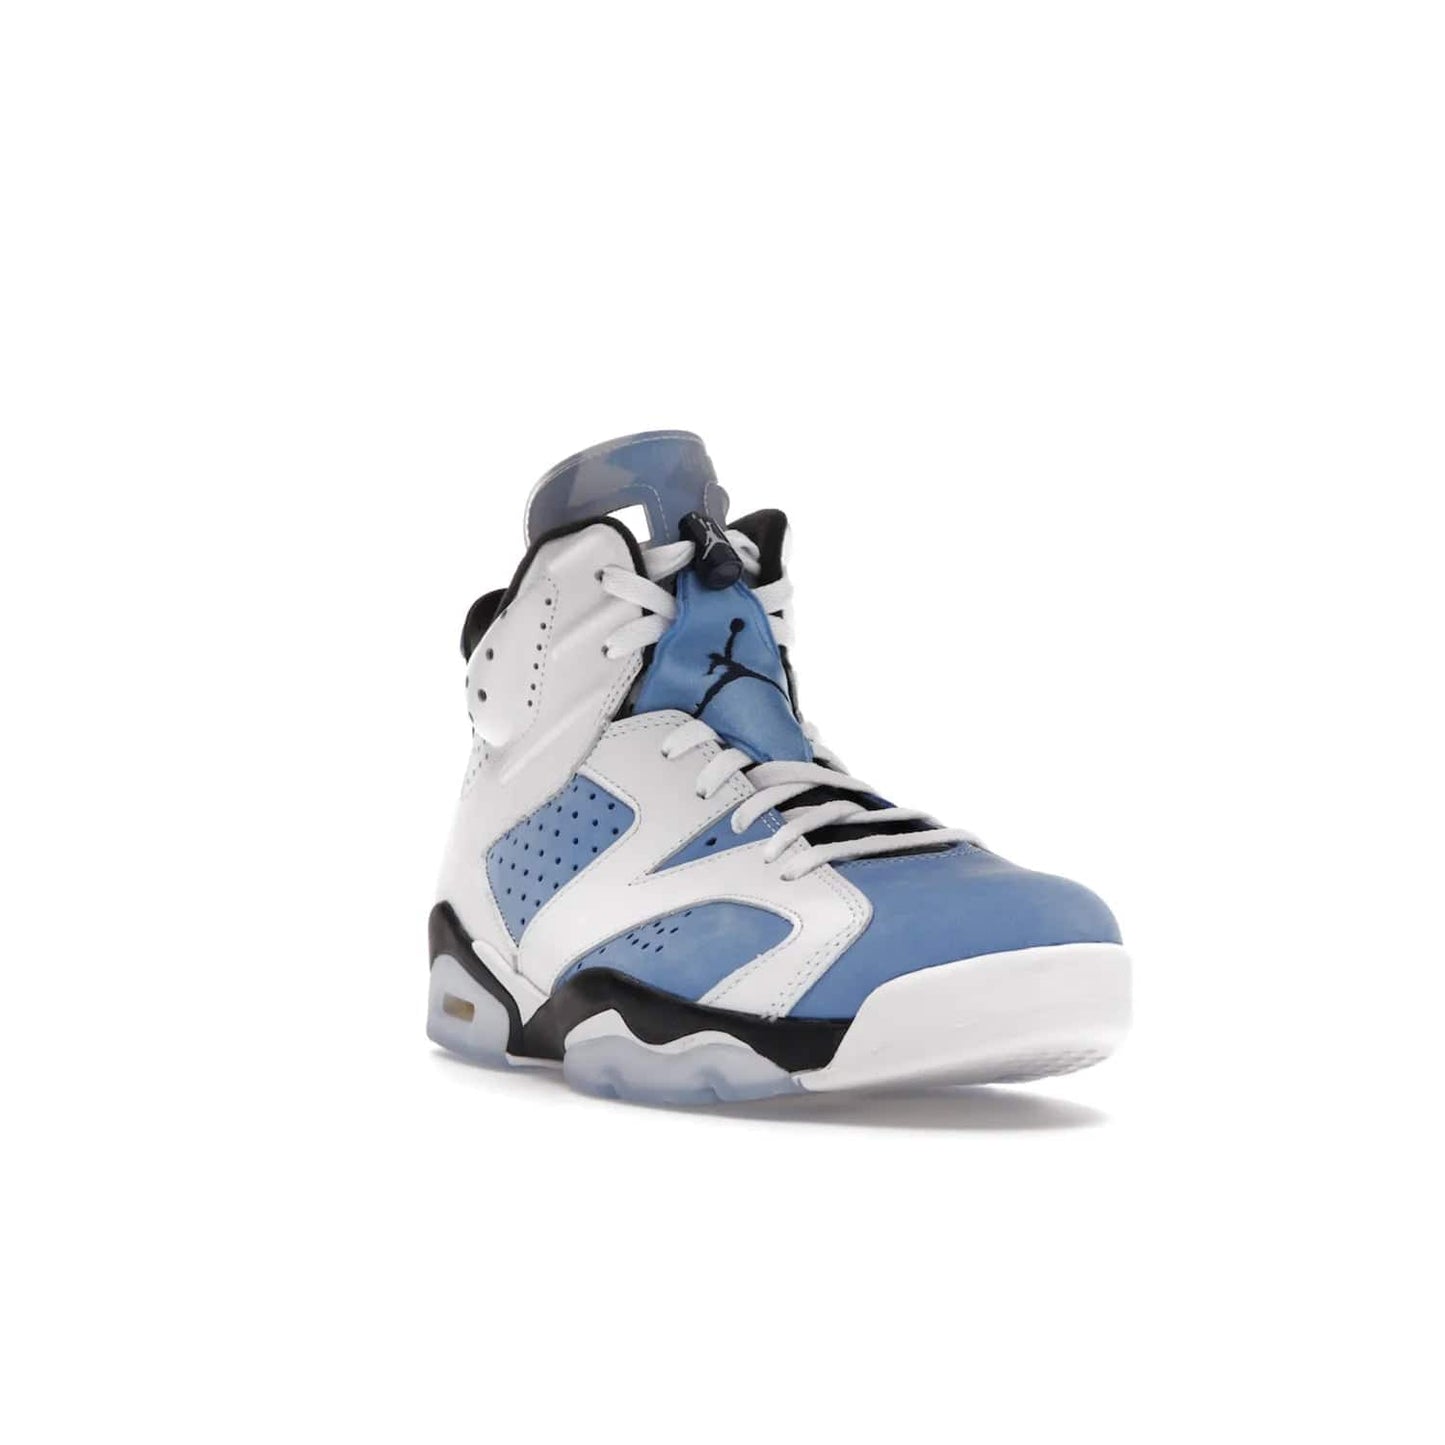 Jordan 6 Retro UNC White - Image 7 - Only at www.BallersClubKickz.com - Air Jordan 6 Retro UNC White with classic UNC colors brings nostalgia and style to a legendary silhouette. Celebrate MJ's alma mater with navy blue accents, icy semi-translucent sole and Jordan Team patch. Out March 2022 for the Sneaker Enthusiast.